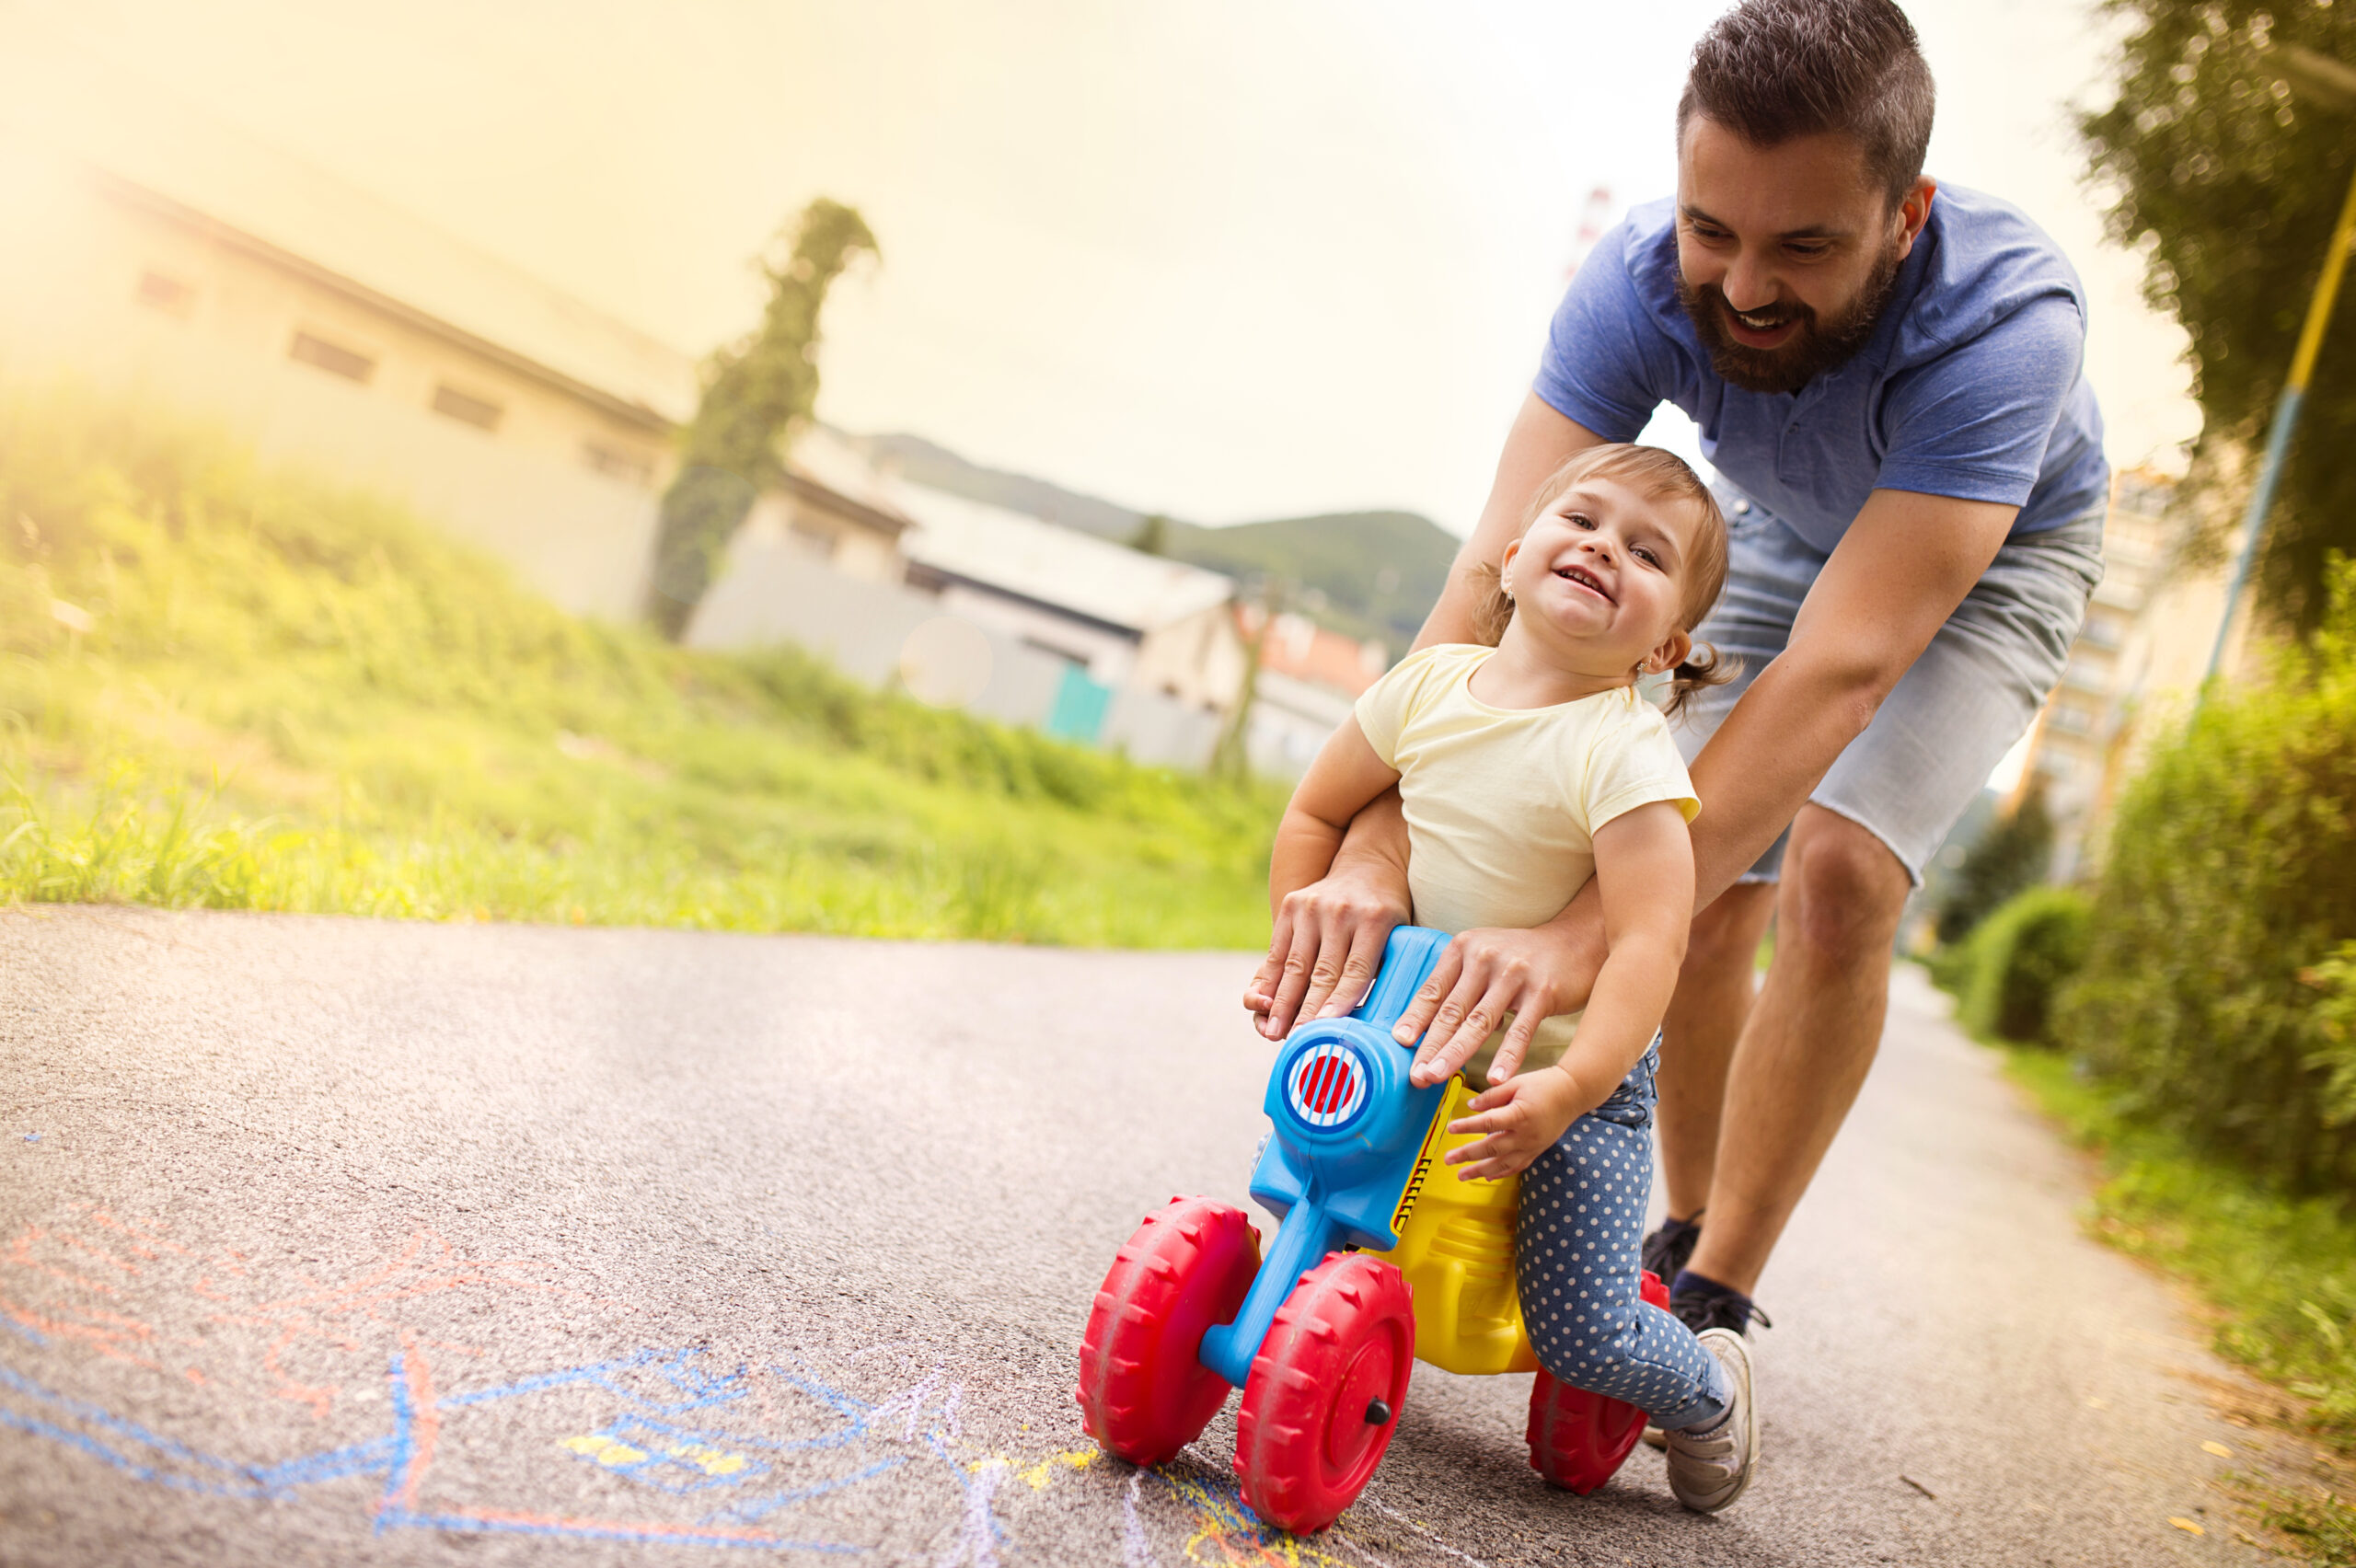 A joyful young child riding a colorful toy truck, guided by a smiling bearded man on a sunlit suburban pathway. the scene is vibrant and full of life.